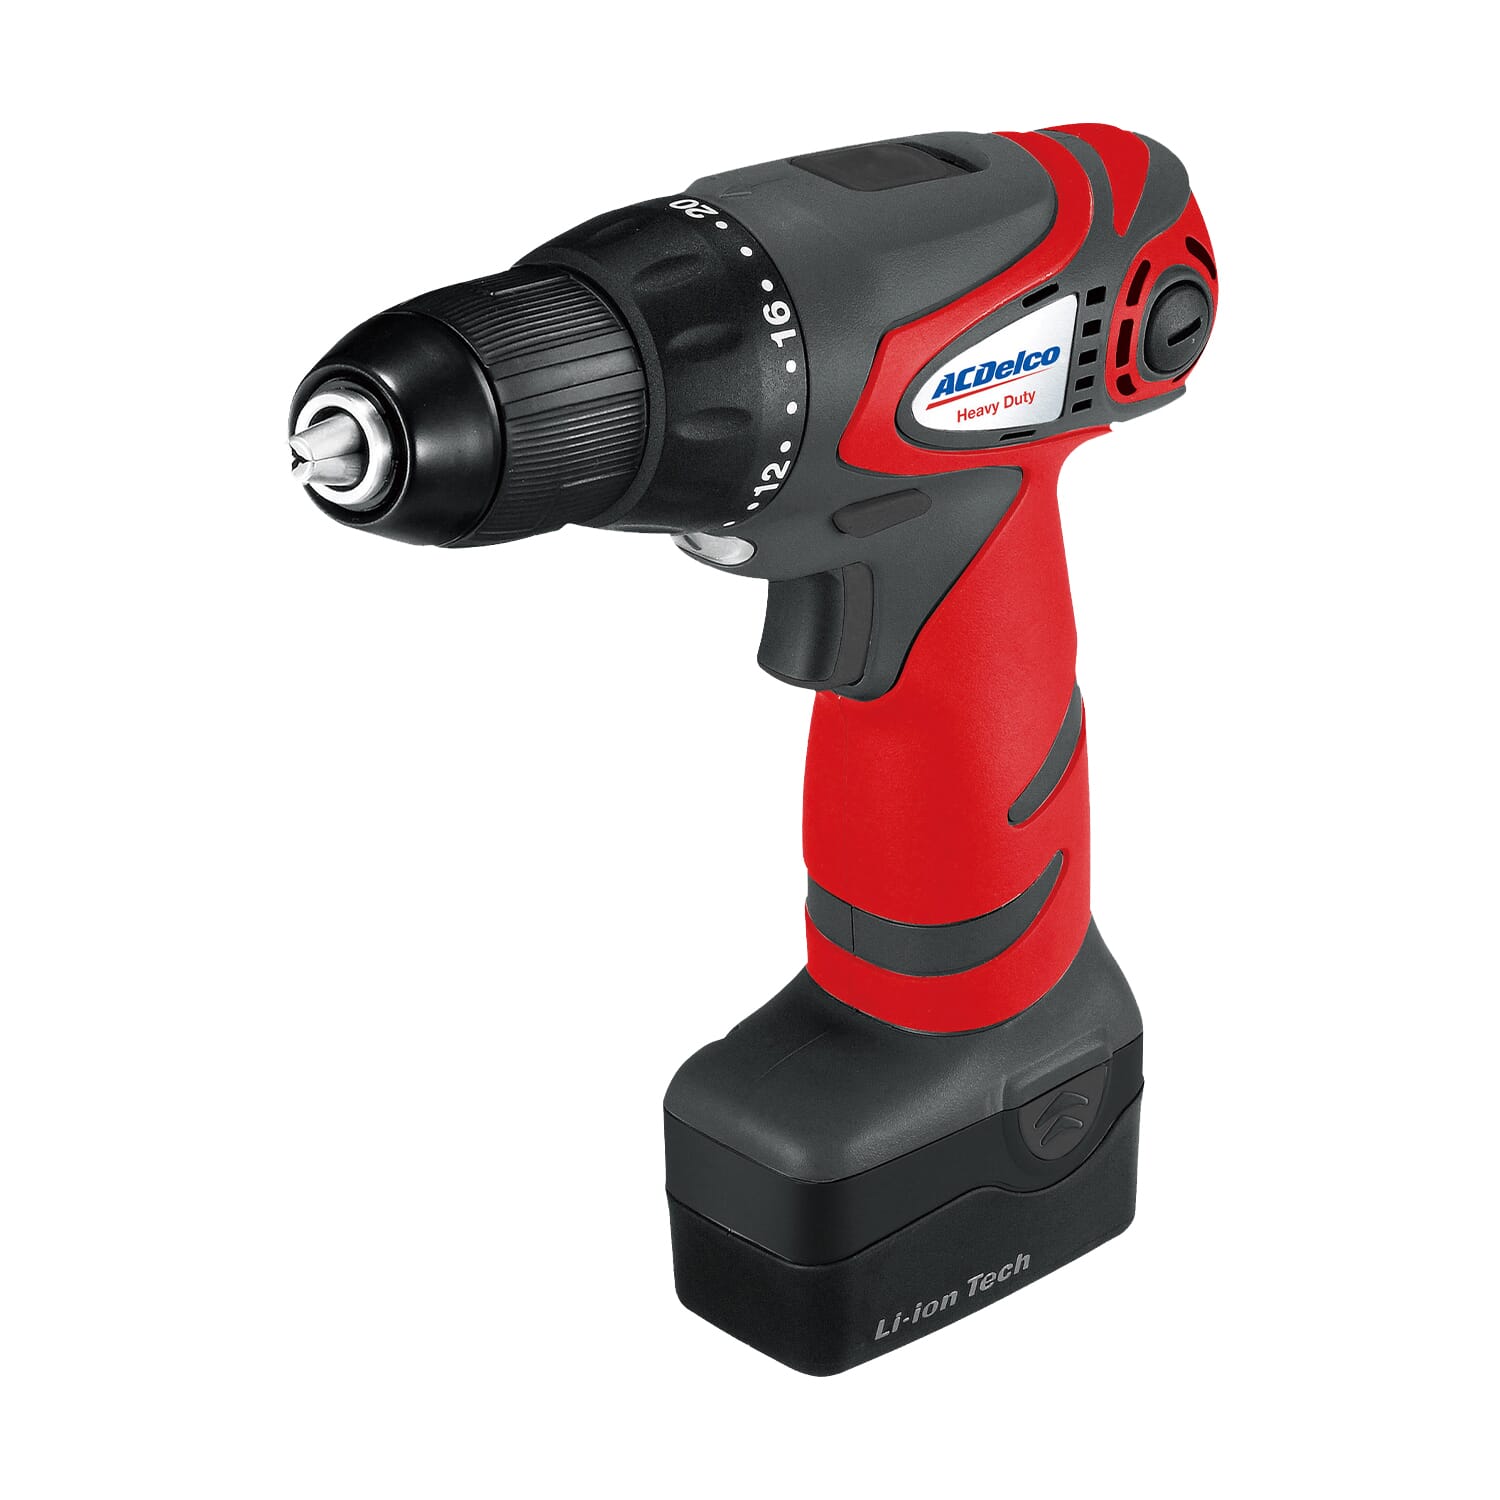 ARK2096I-3 Lithium-Ion 8V Hammer Drill / Driver, 3/8" Impact Wrench and Driver Power Tool Combo Kit